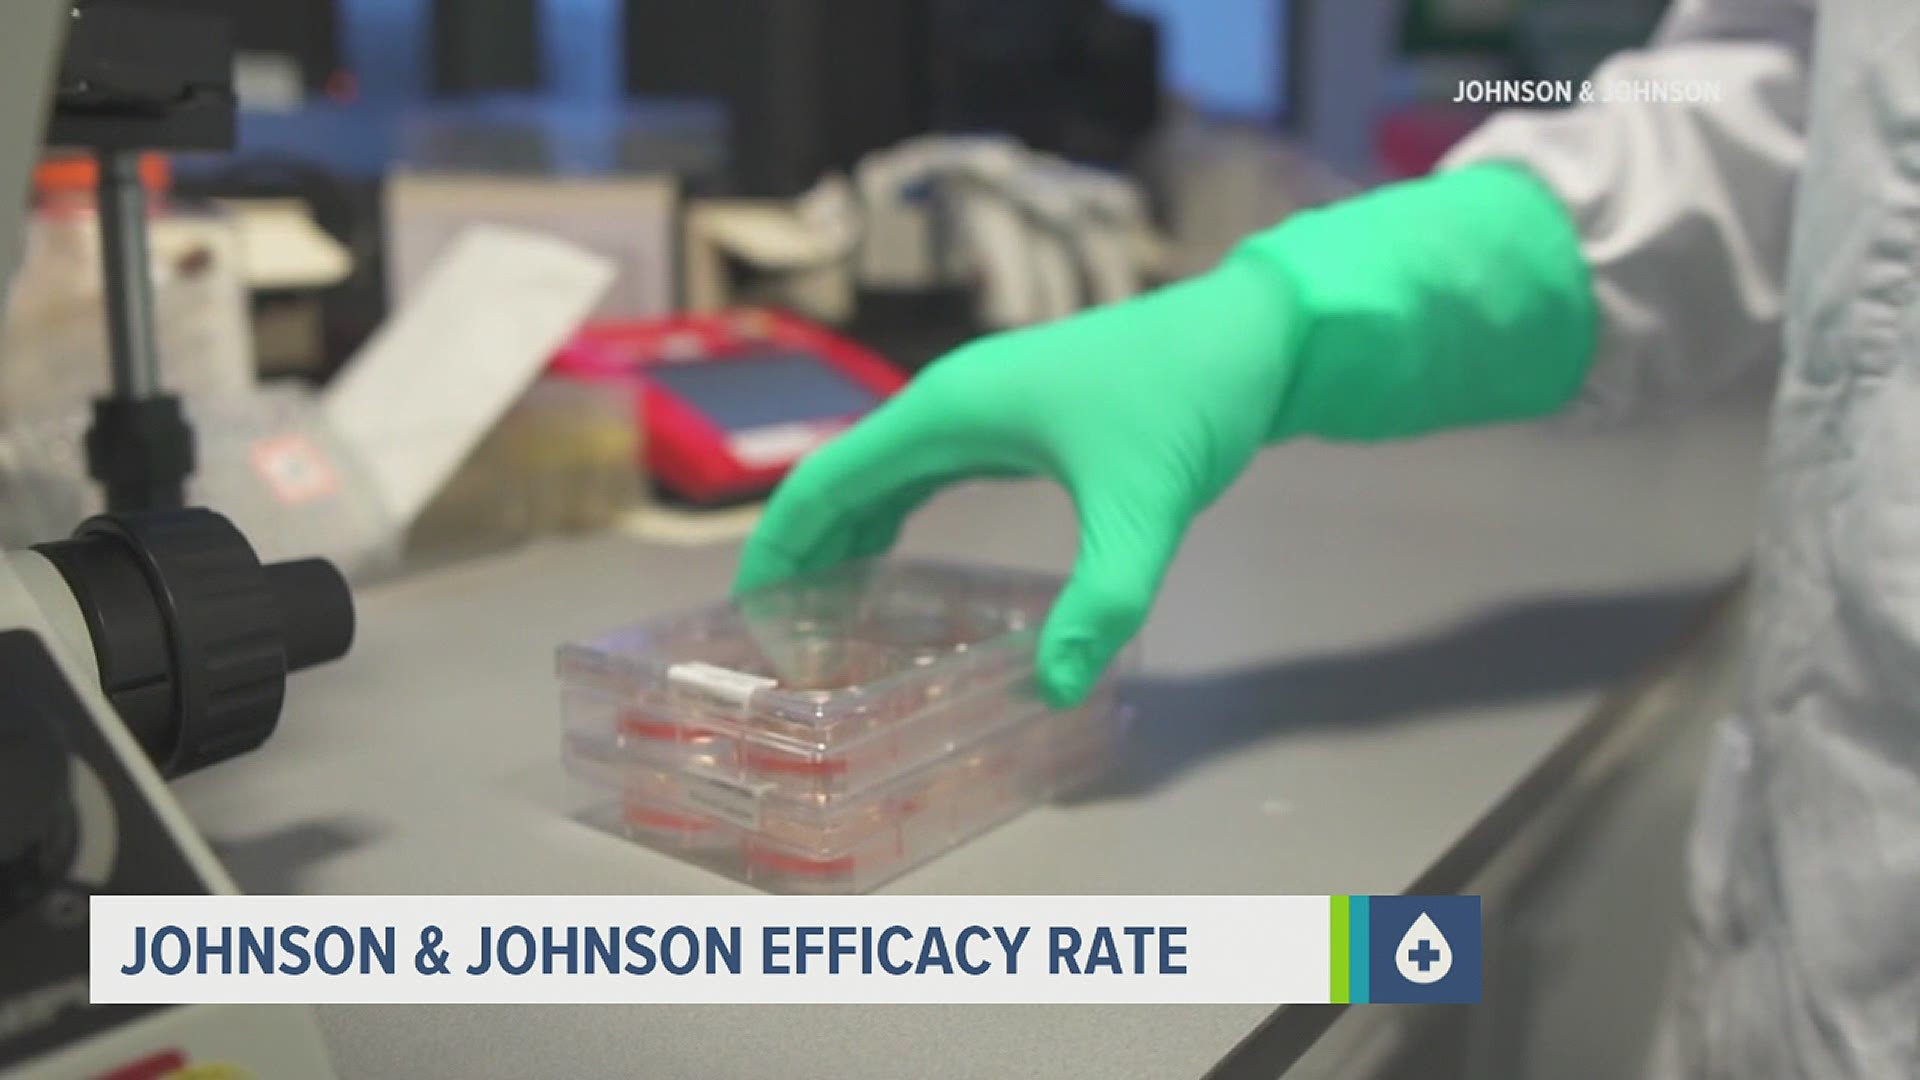 Comparing J&J's efficacy rate to Moderna and Pfizer's approximate 95% efficacy isn't fair, according to a researcher from the University of Colorado.